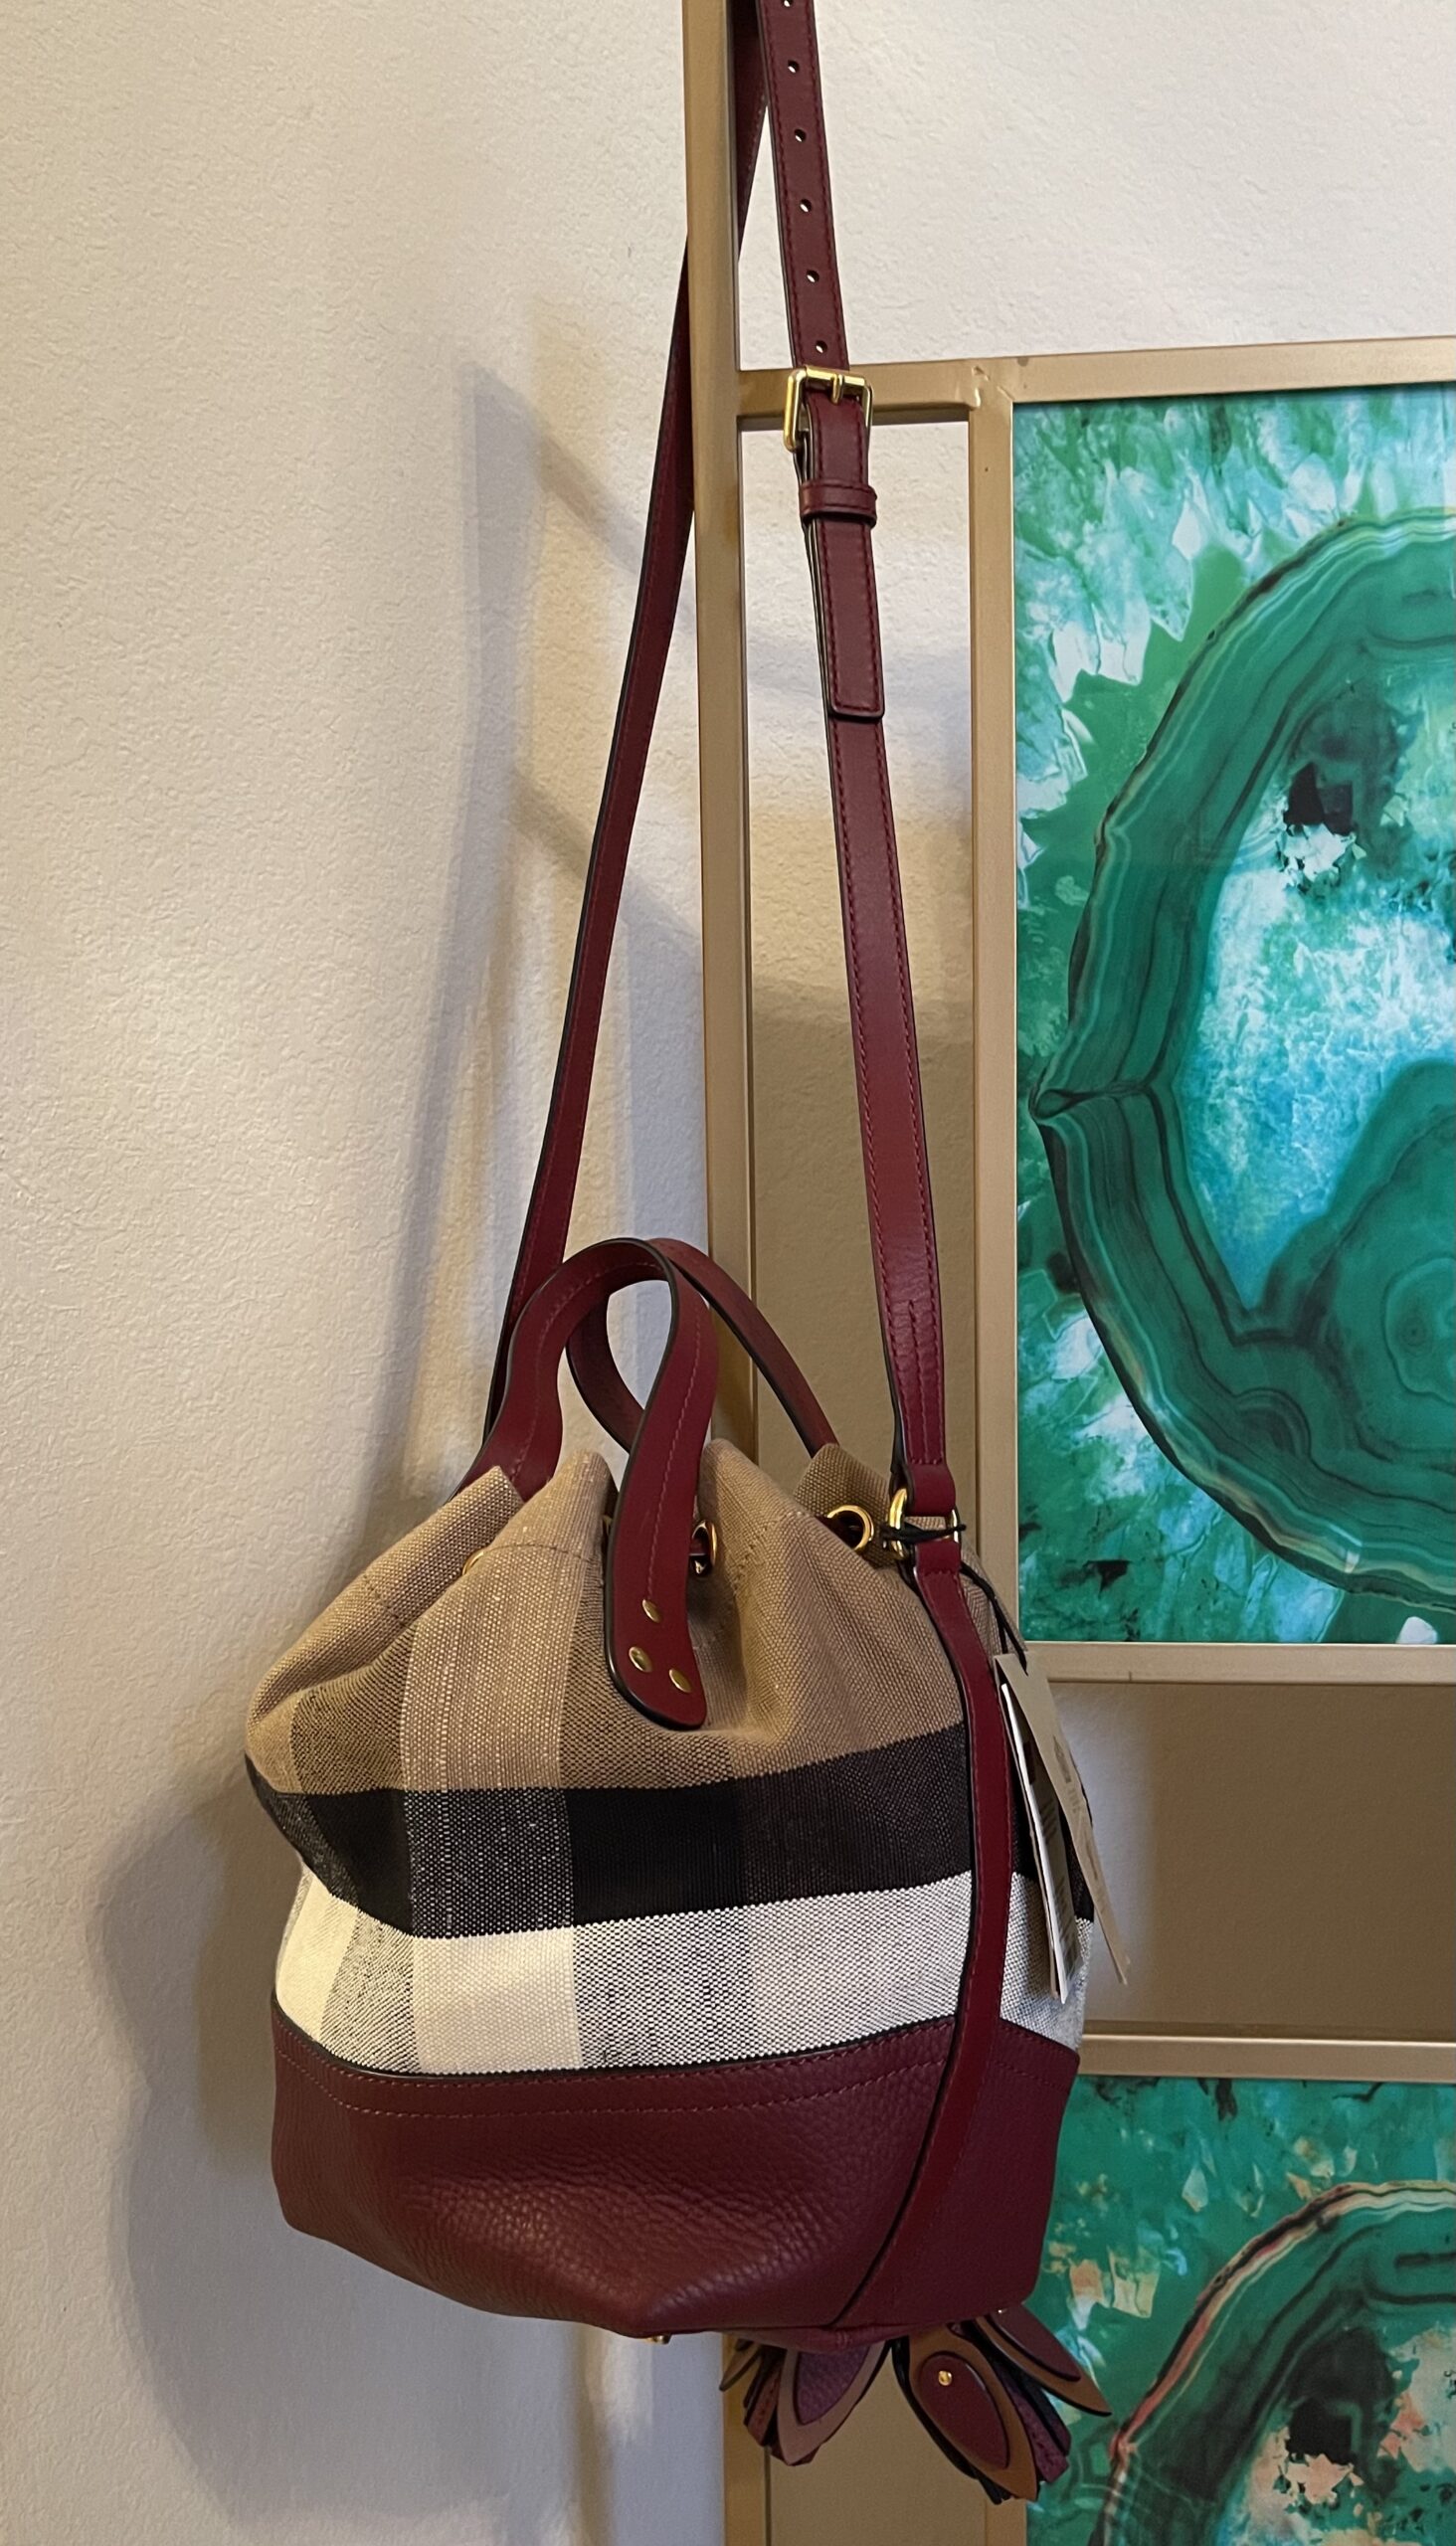 Burberry Extra Large Shield Tote